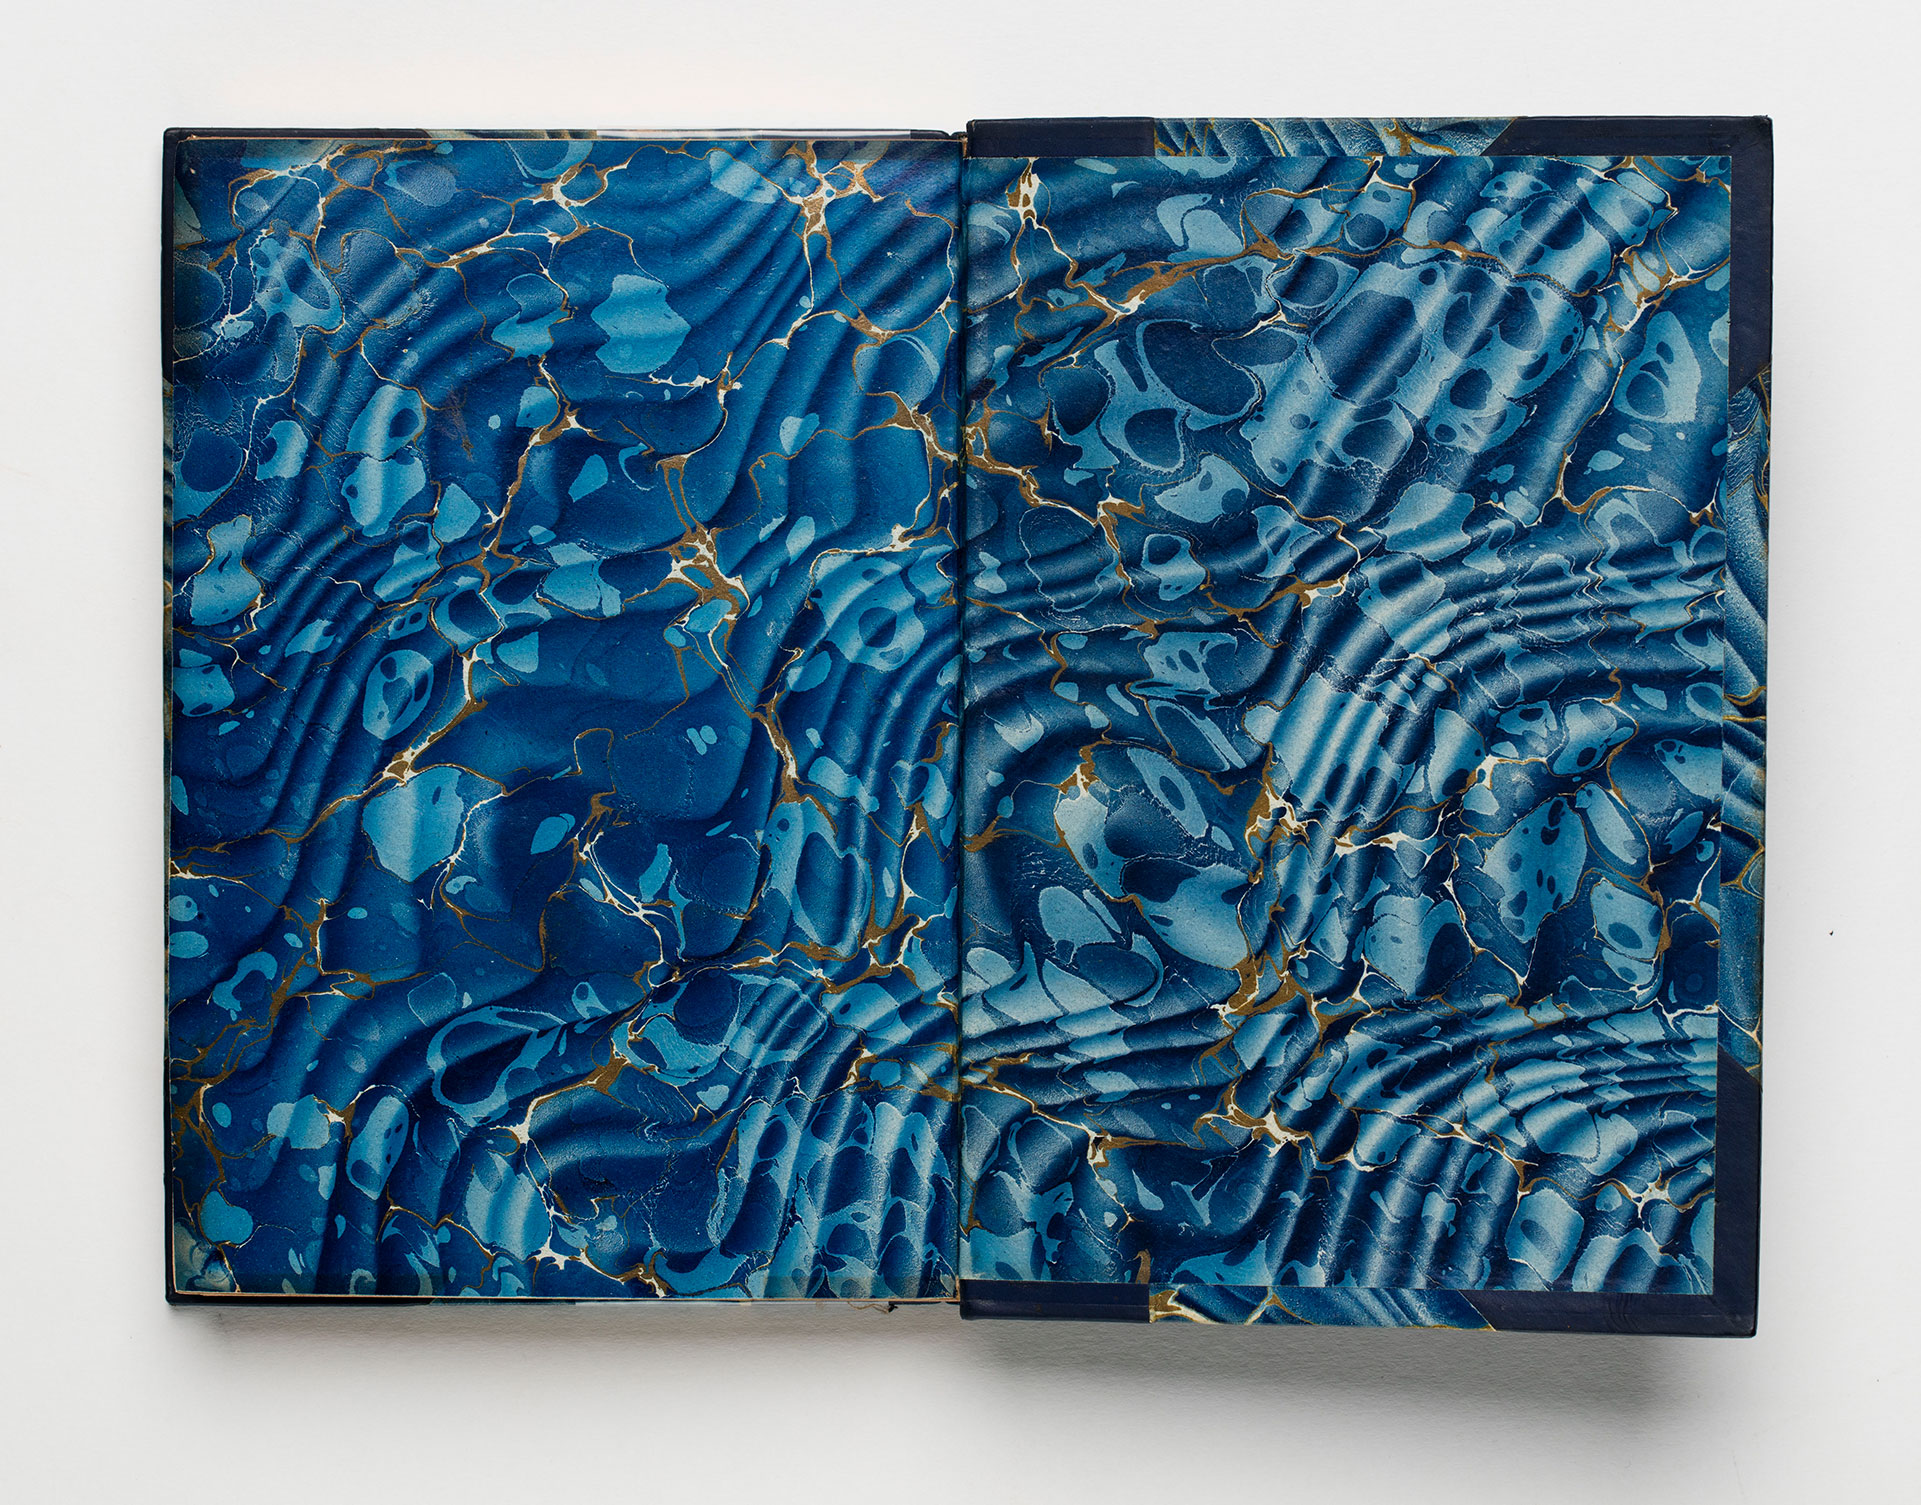 An endpaper patterned in ripples of blue and gold.